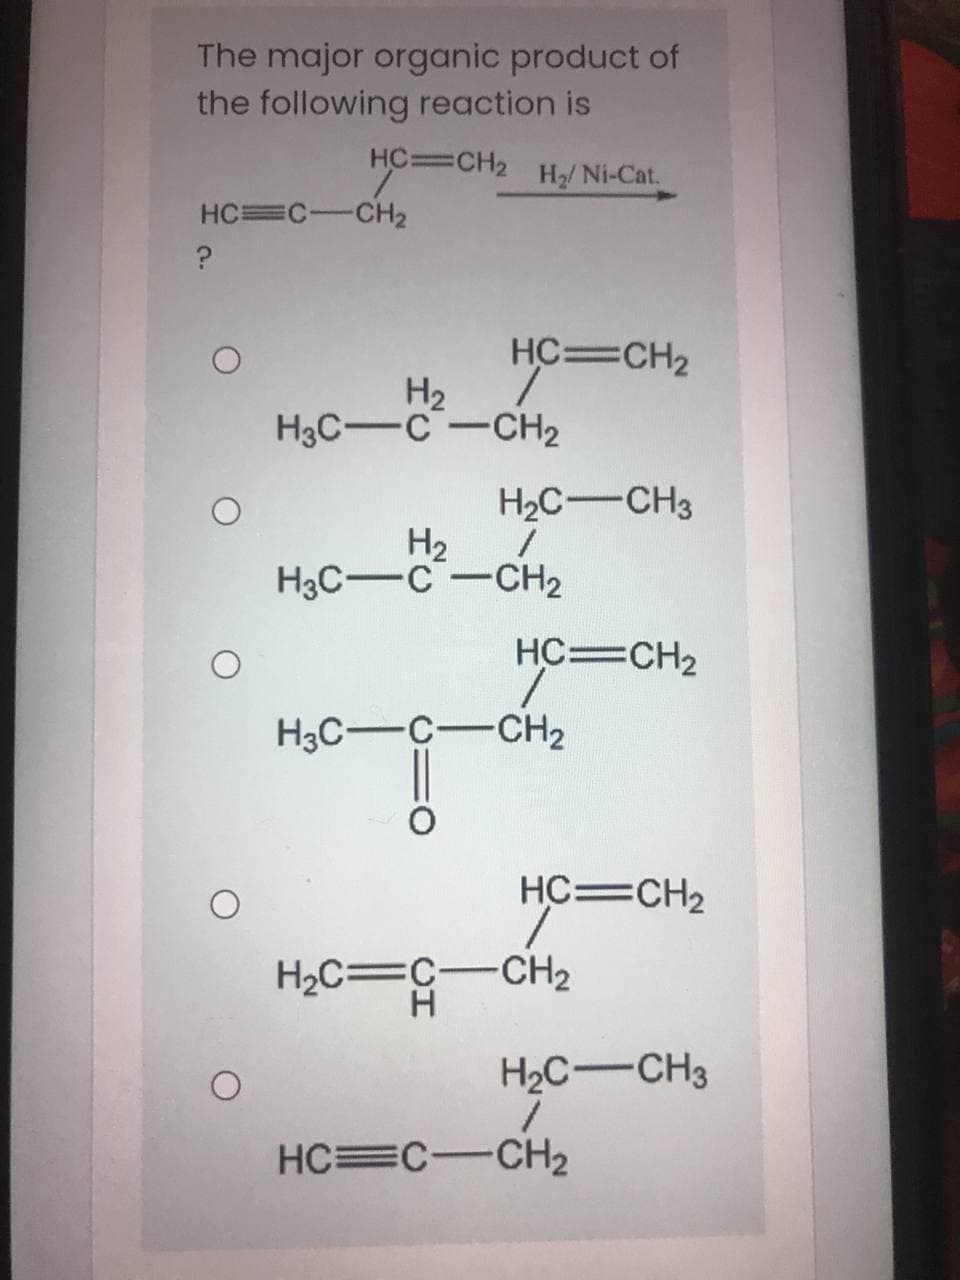 The major organic product of
the following reaction is
HC=CH2
H2/ Ni-Cat.
HC=C-CH2
HC=CH2
H2
1.
H3C-C -CH2
H2C-CH3
H2
H3C-C-CH2
HC=CH2
H3C-C-CH2
HC=CH2
H2C=C-CH2
H.
H2C-CH3
HC=C-CH2
